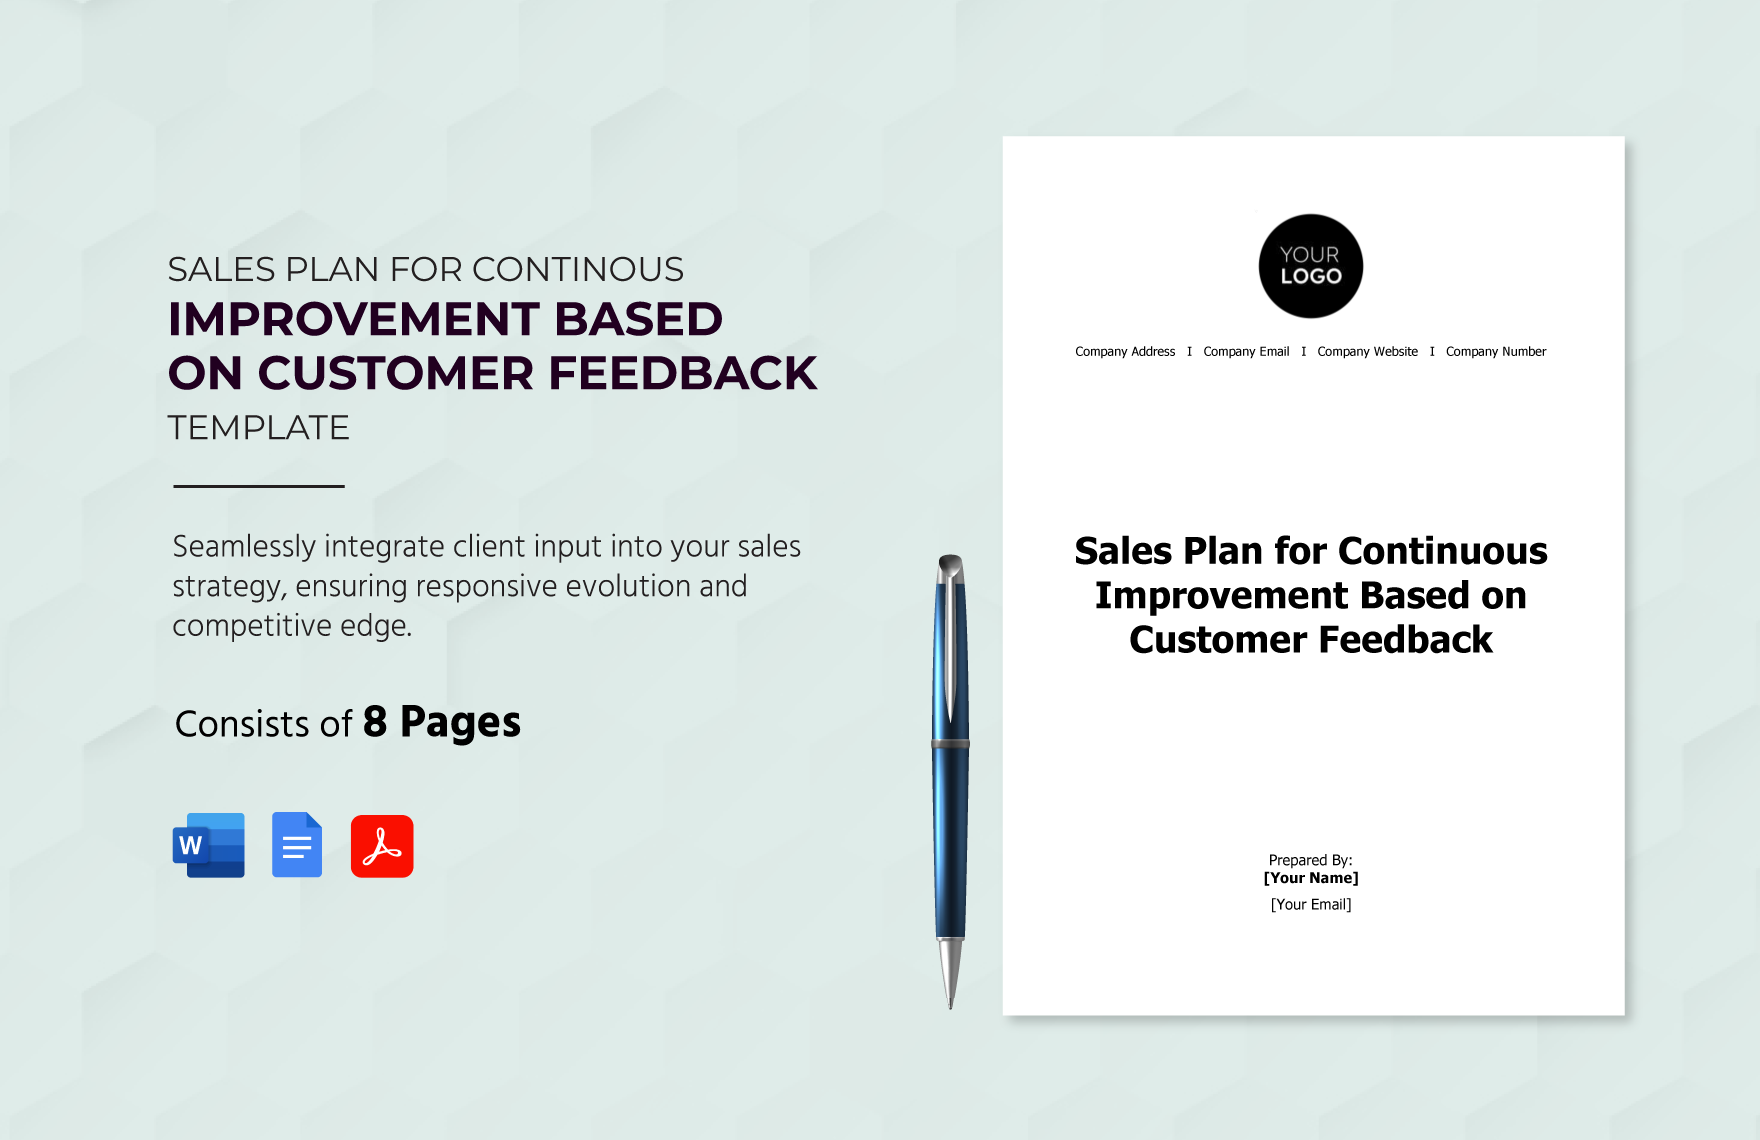 Sales Plan for Continuous Improvement Based on Customer Feedback Template